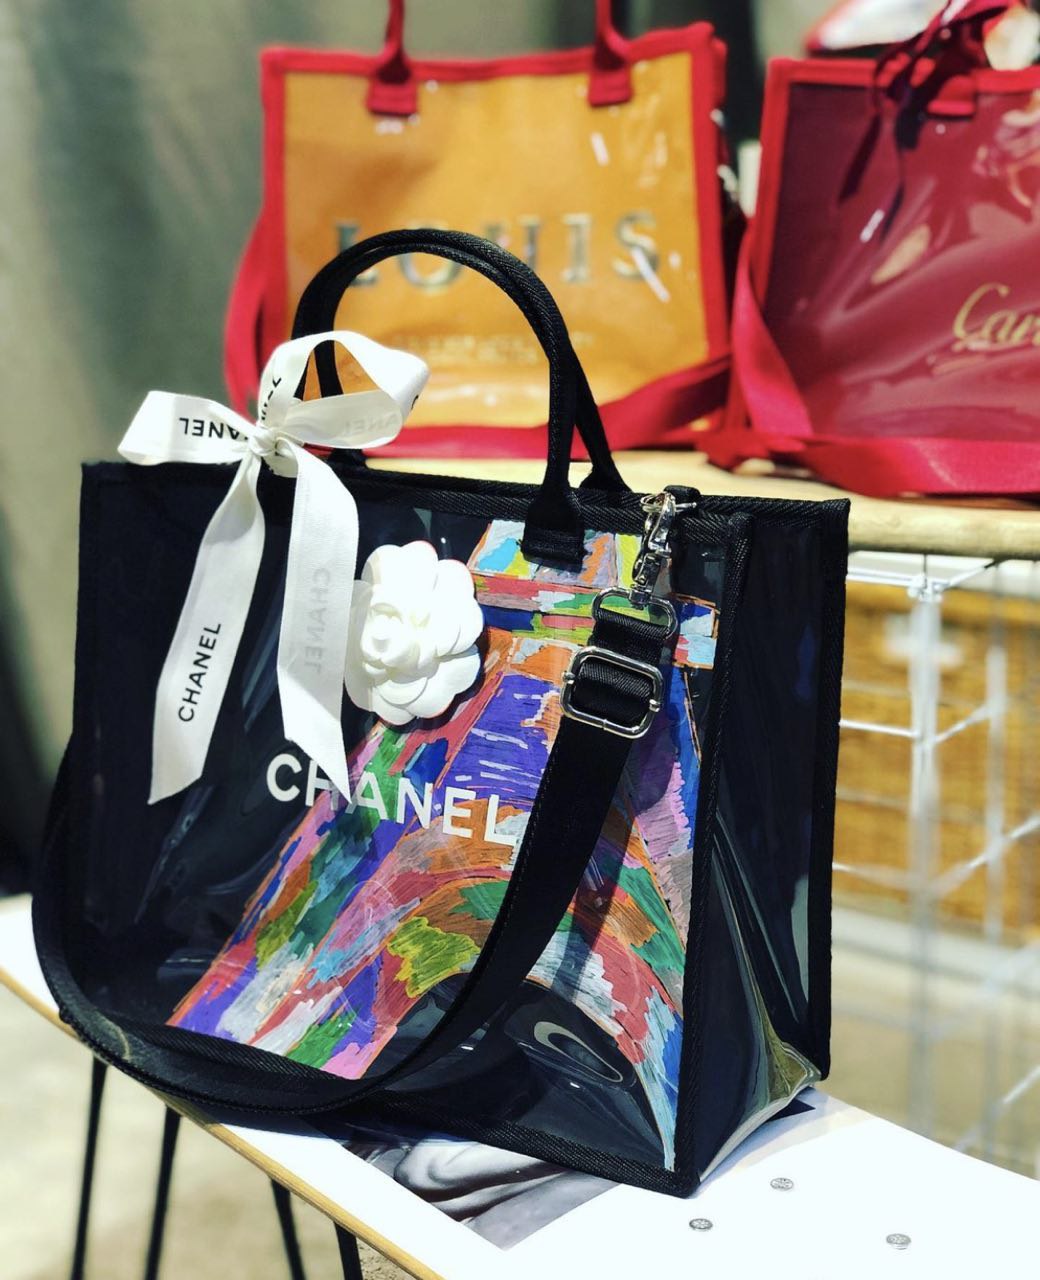 TURN YOUR USED LUXURY PAPER BAGS INTO NEW & UPCYCLED HANDBAGS AT FAR EAST  PLAZA - Shout